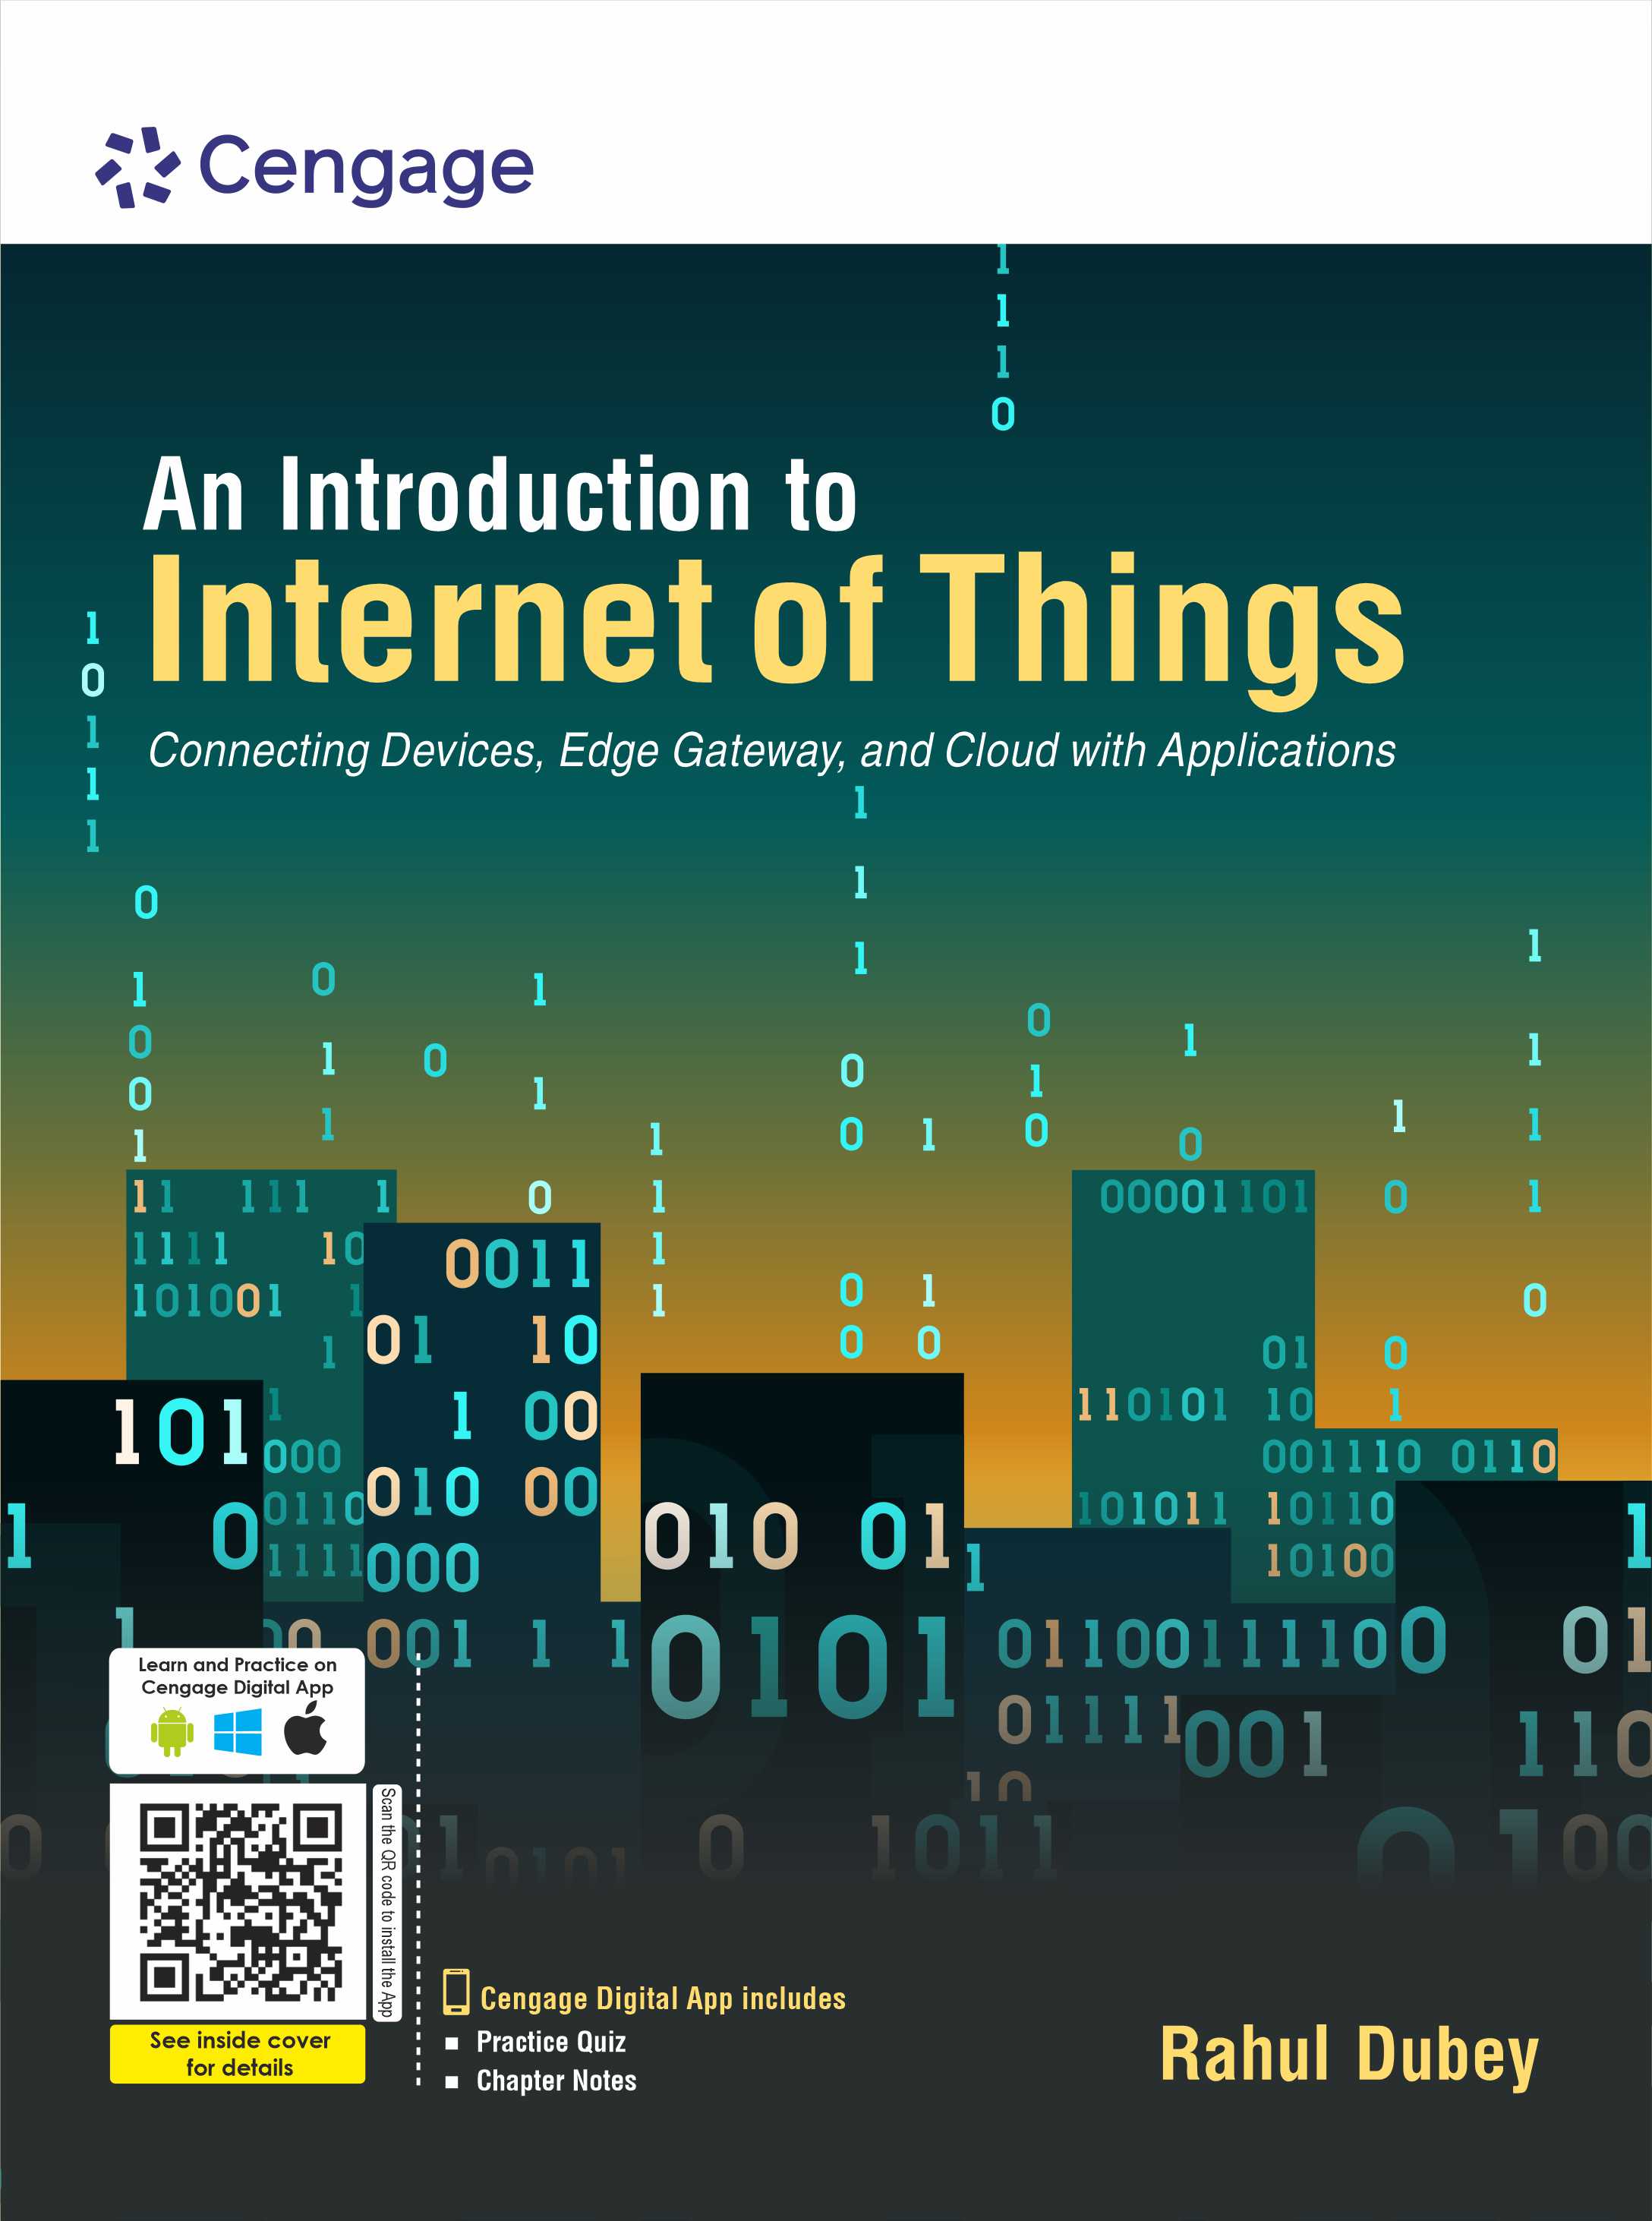 An Introduction to Internet of Things